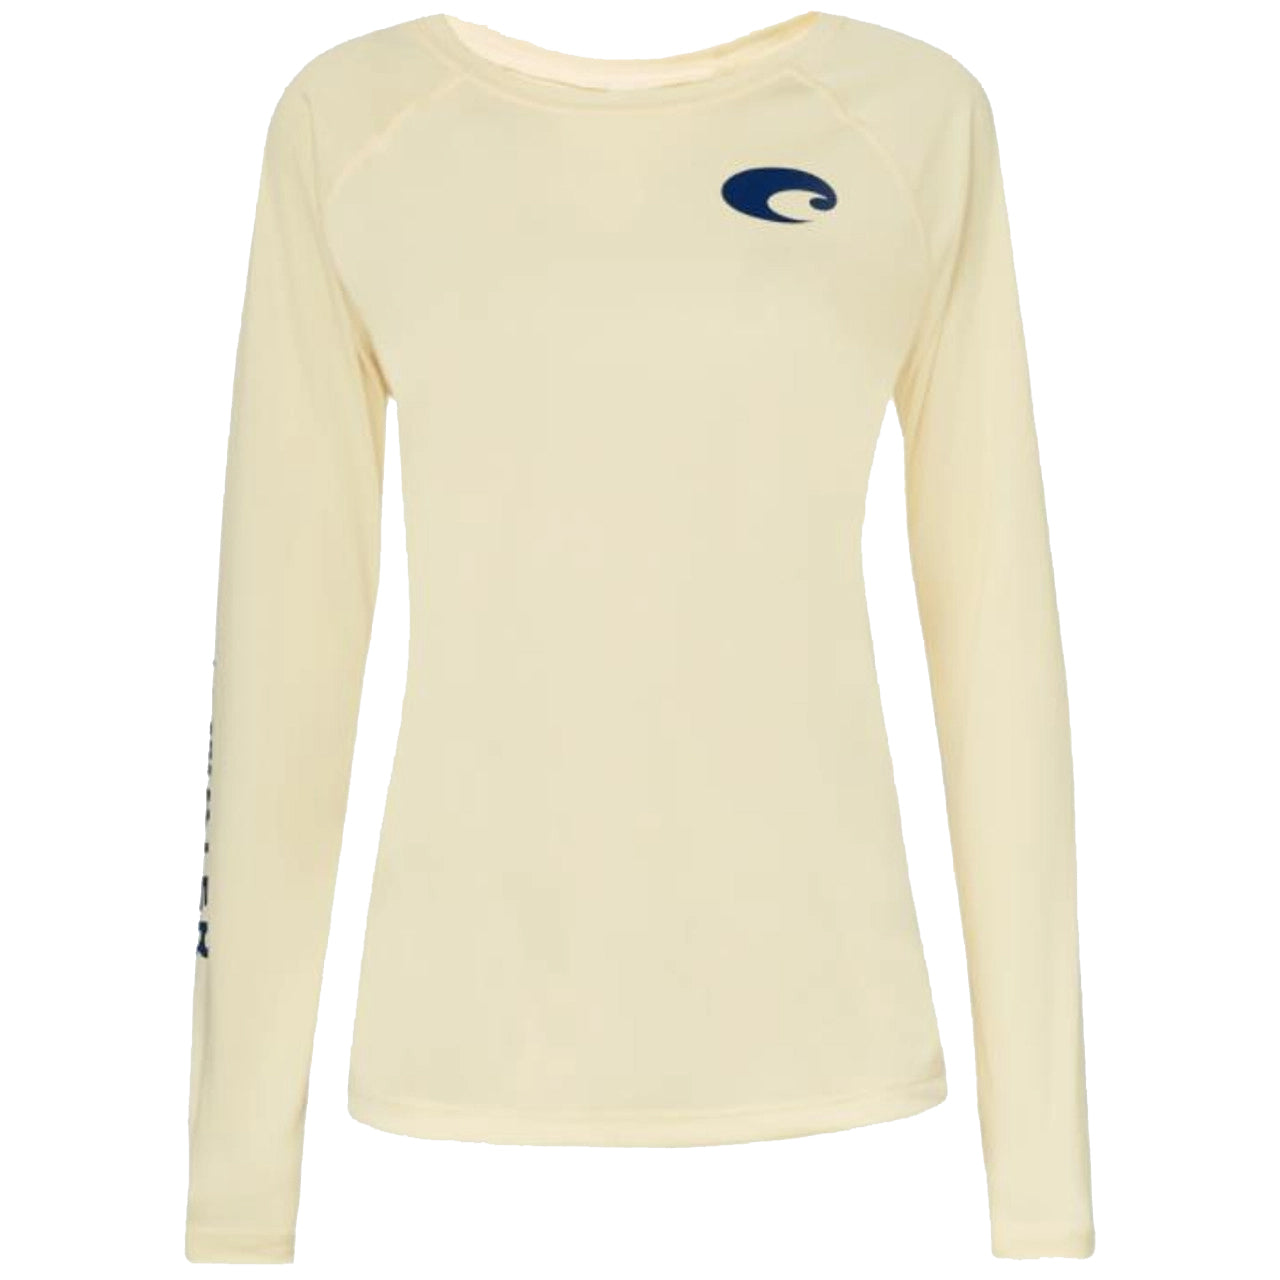 XPEL® Tec Long Sleeve Top in Pewter Camo - Gill Fishing